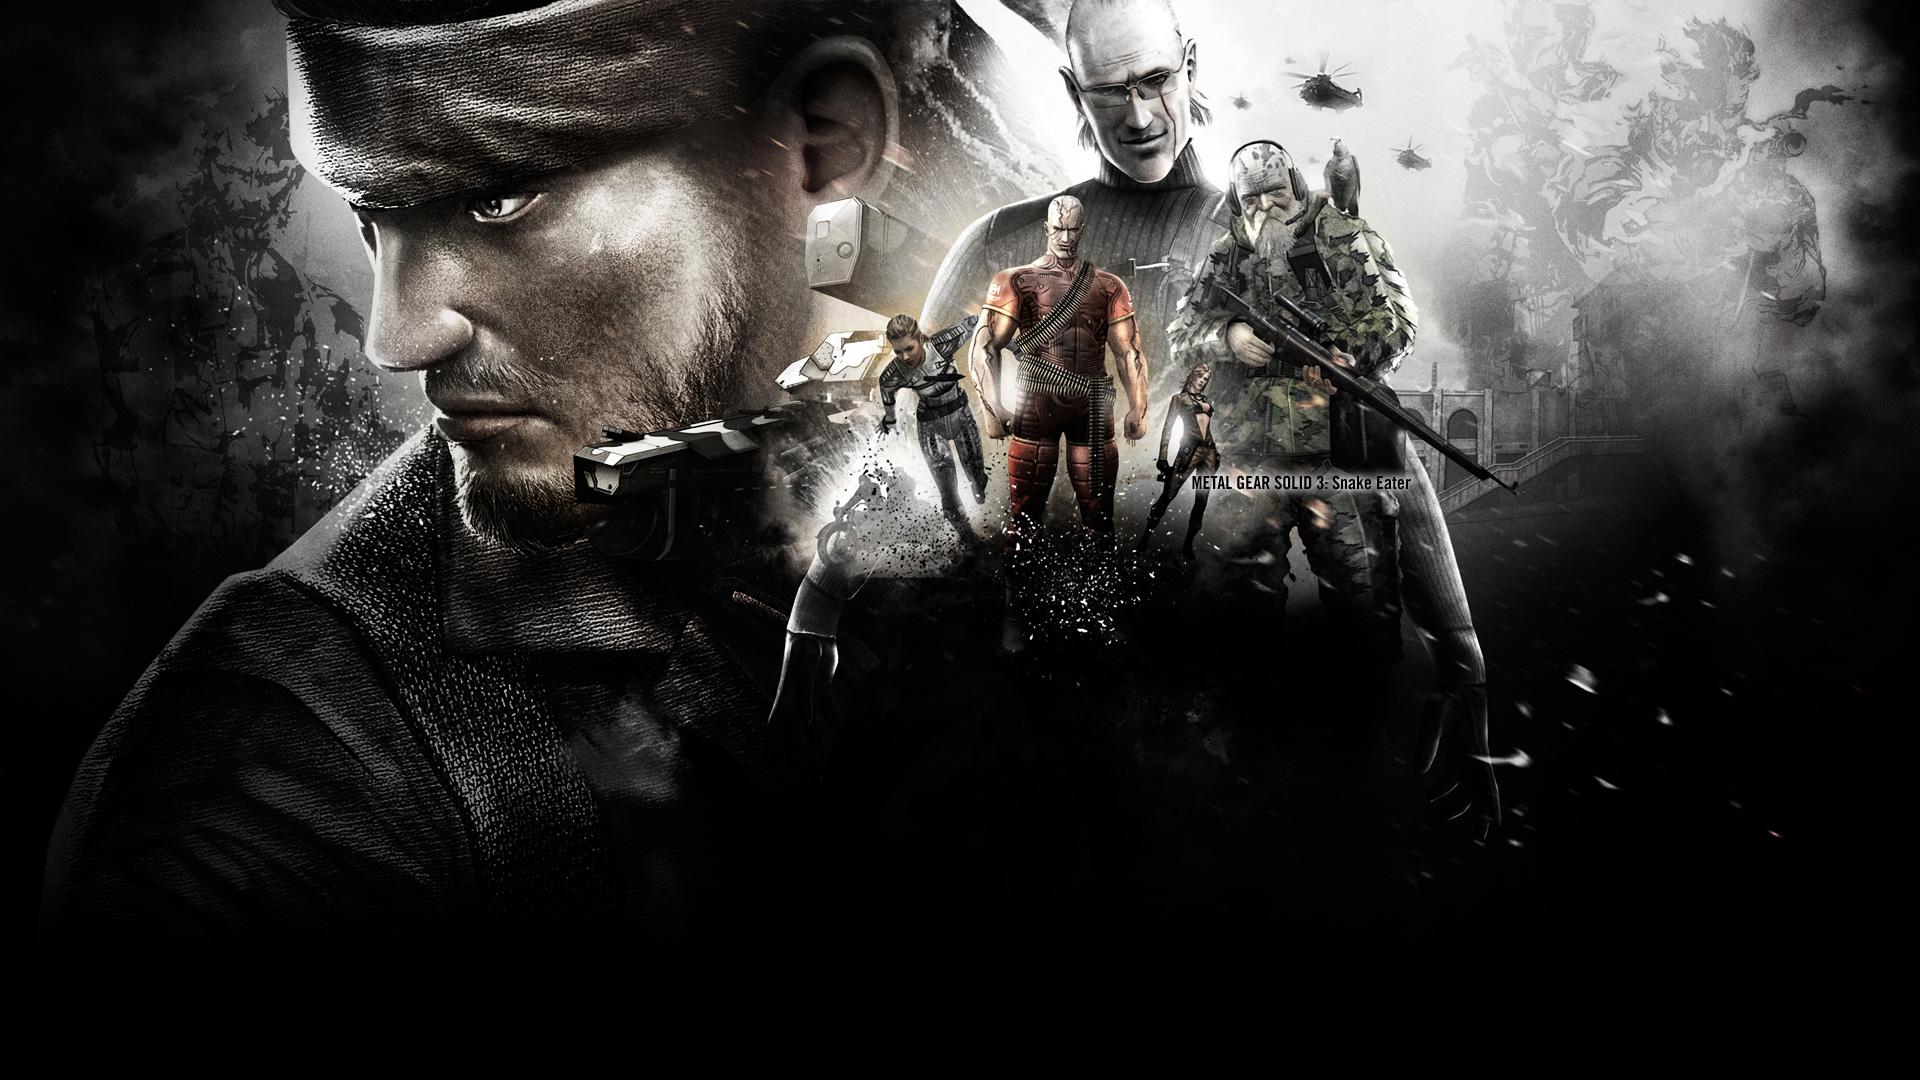 Mgs 3 Wallpapers - Wallpaper Cave